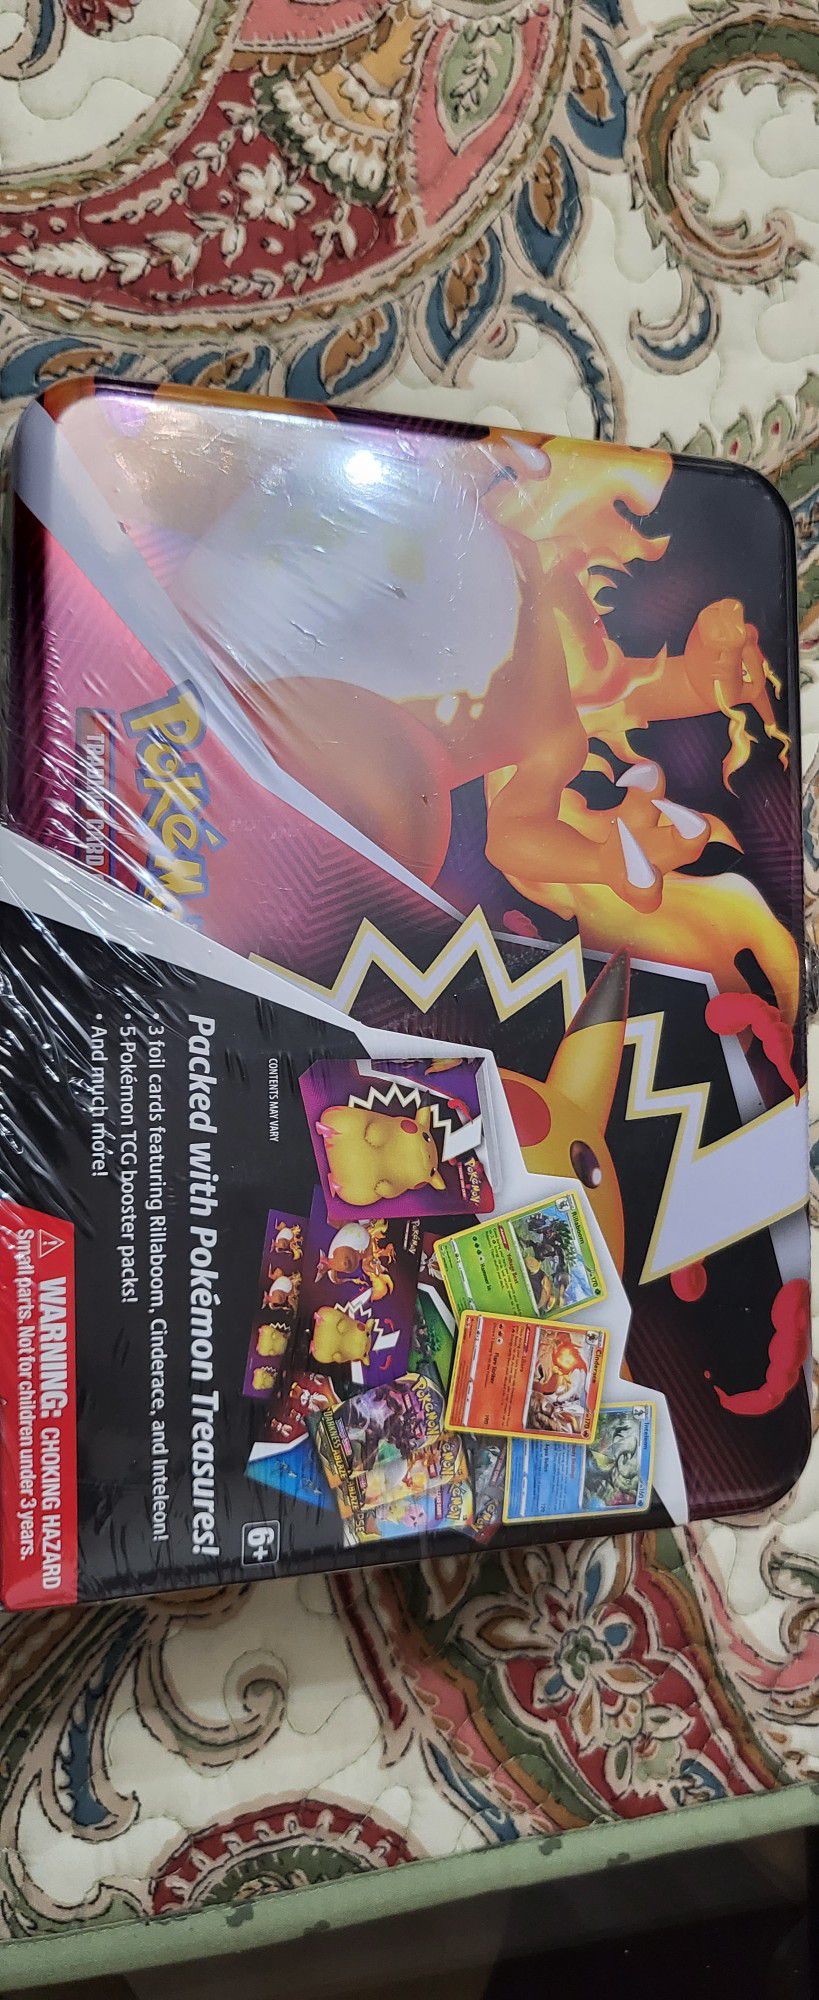 NEW Pokemon TCG Collectors Chest Tin Lunchbox 5 Booster Packs -SEALED